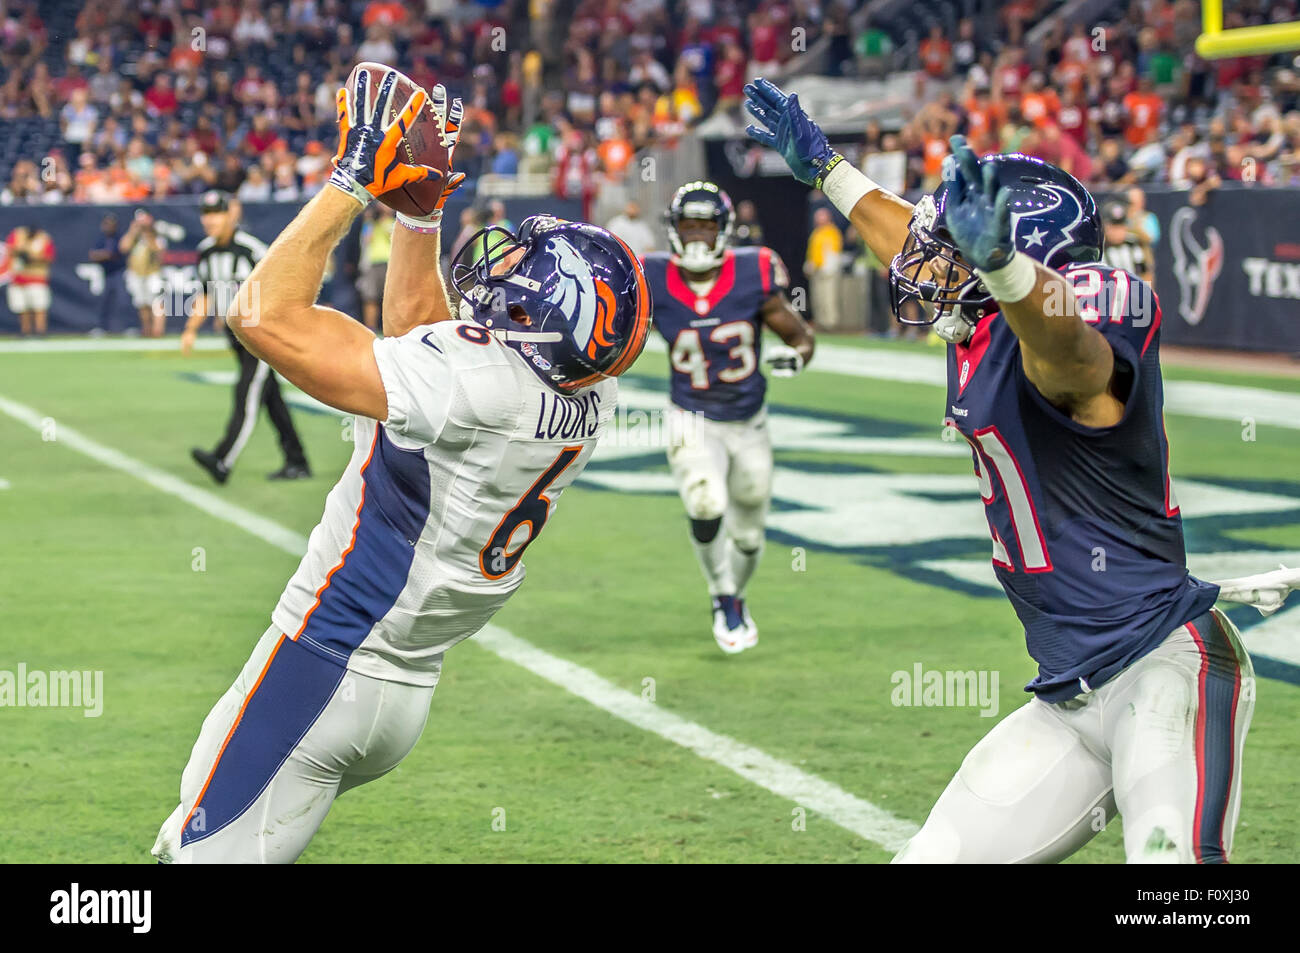 Houston, TX, USA. 22nd Aug, 2015. Denver Broncos wide receiver Corbin Louks (6) receives the ball for a touchdown during the NFL preseason football game between the Denver Broncos and the Houston Texans at NRG Stadium in Houston, TX. Rudy Hardy/CSM/Alamy Live News Stock Photo